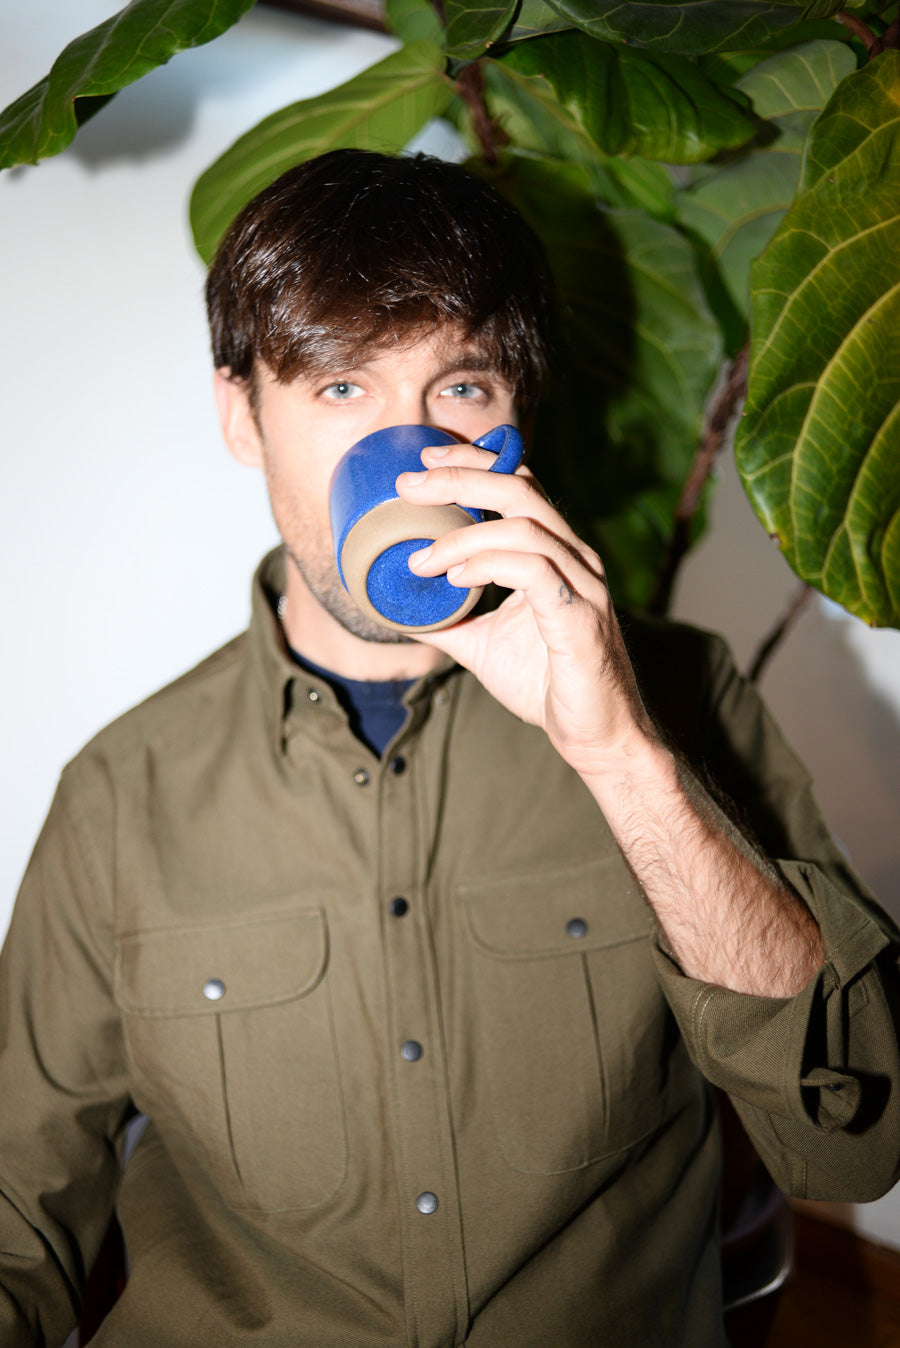 Dylan wears a green button down shirt and drinks from a mug.